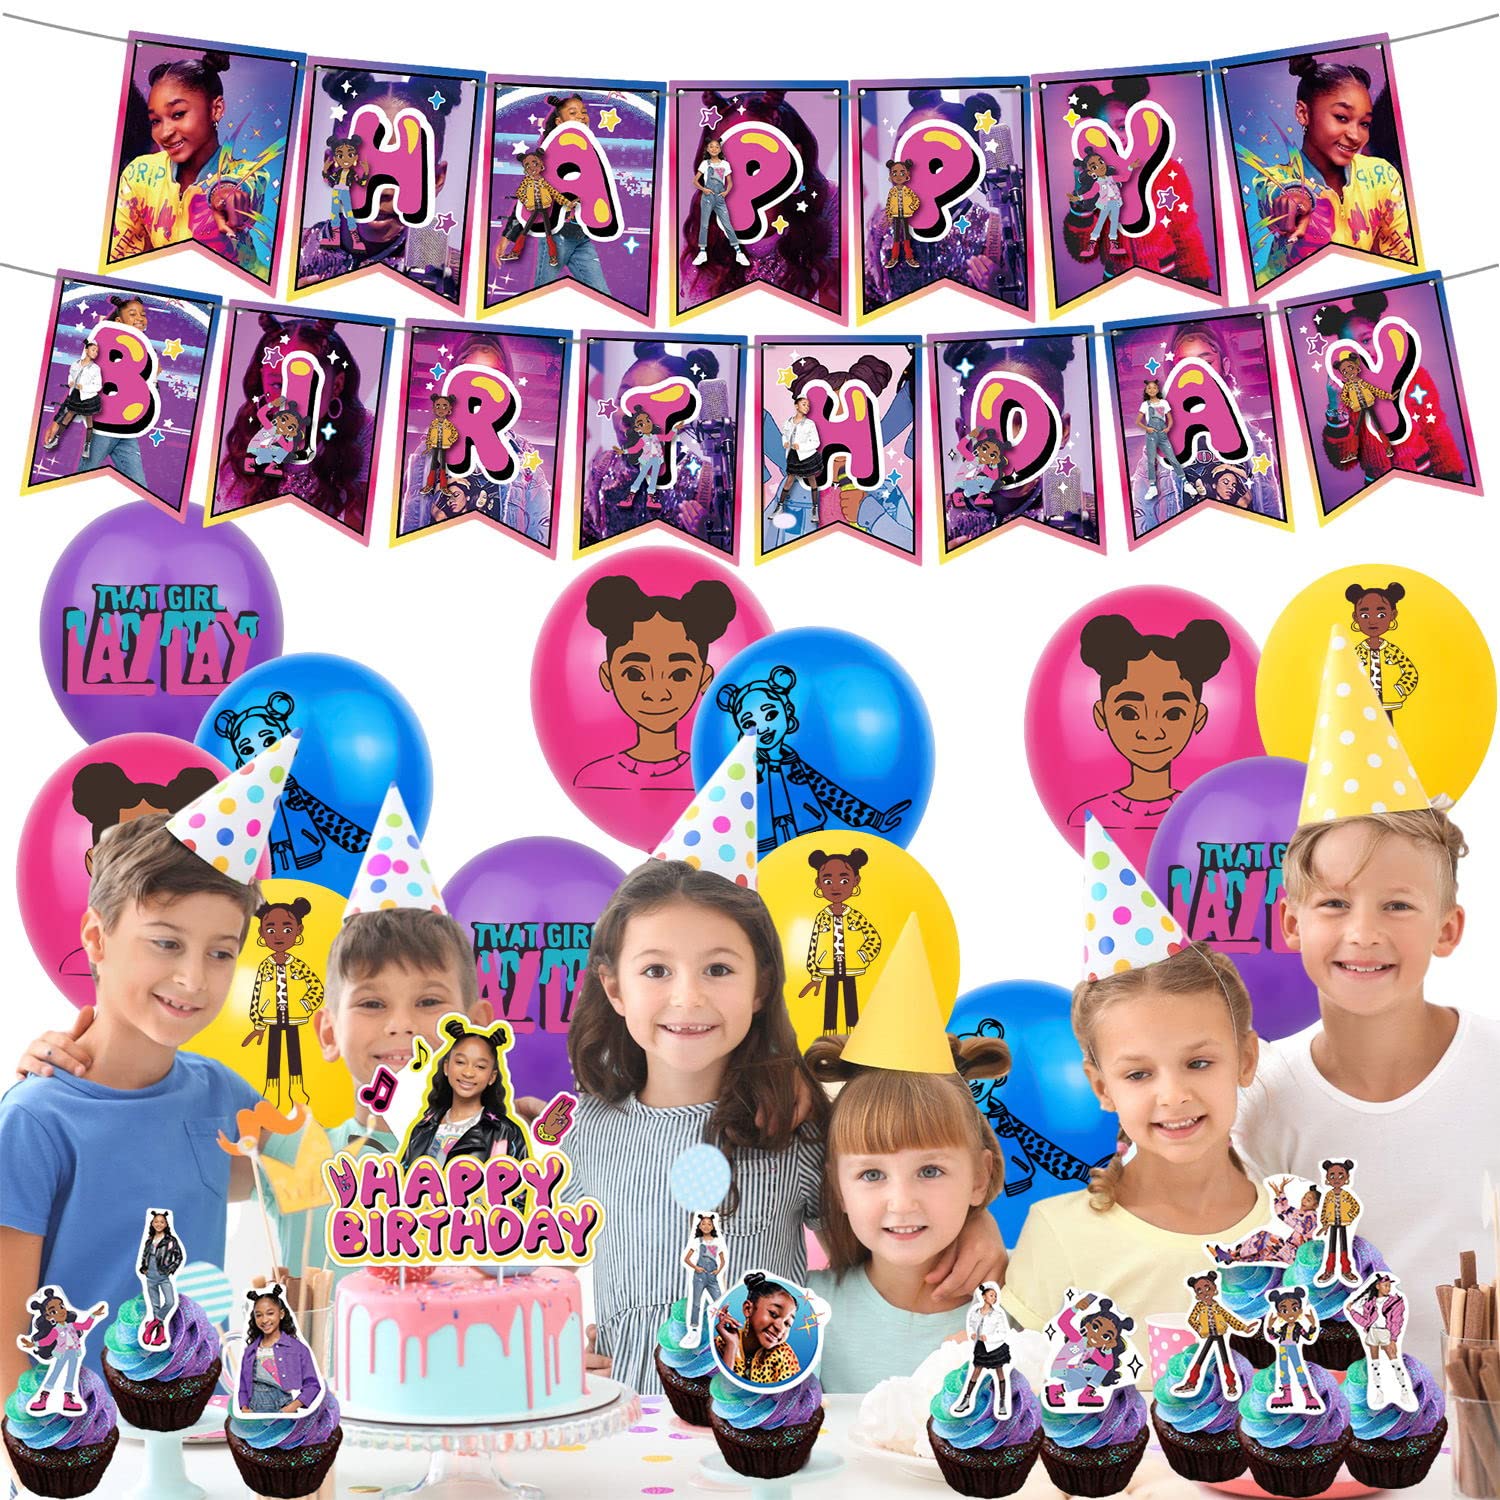 That Girl Lay Girl Birthday Party Decoration, Music Super Girl Theme Party Supplies，That Girl Theme Fans, Kids Birthday Party Supplies